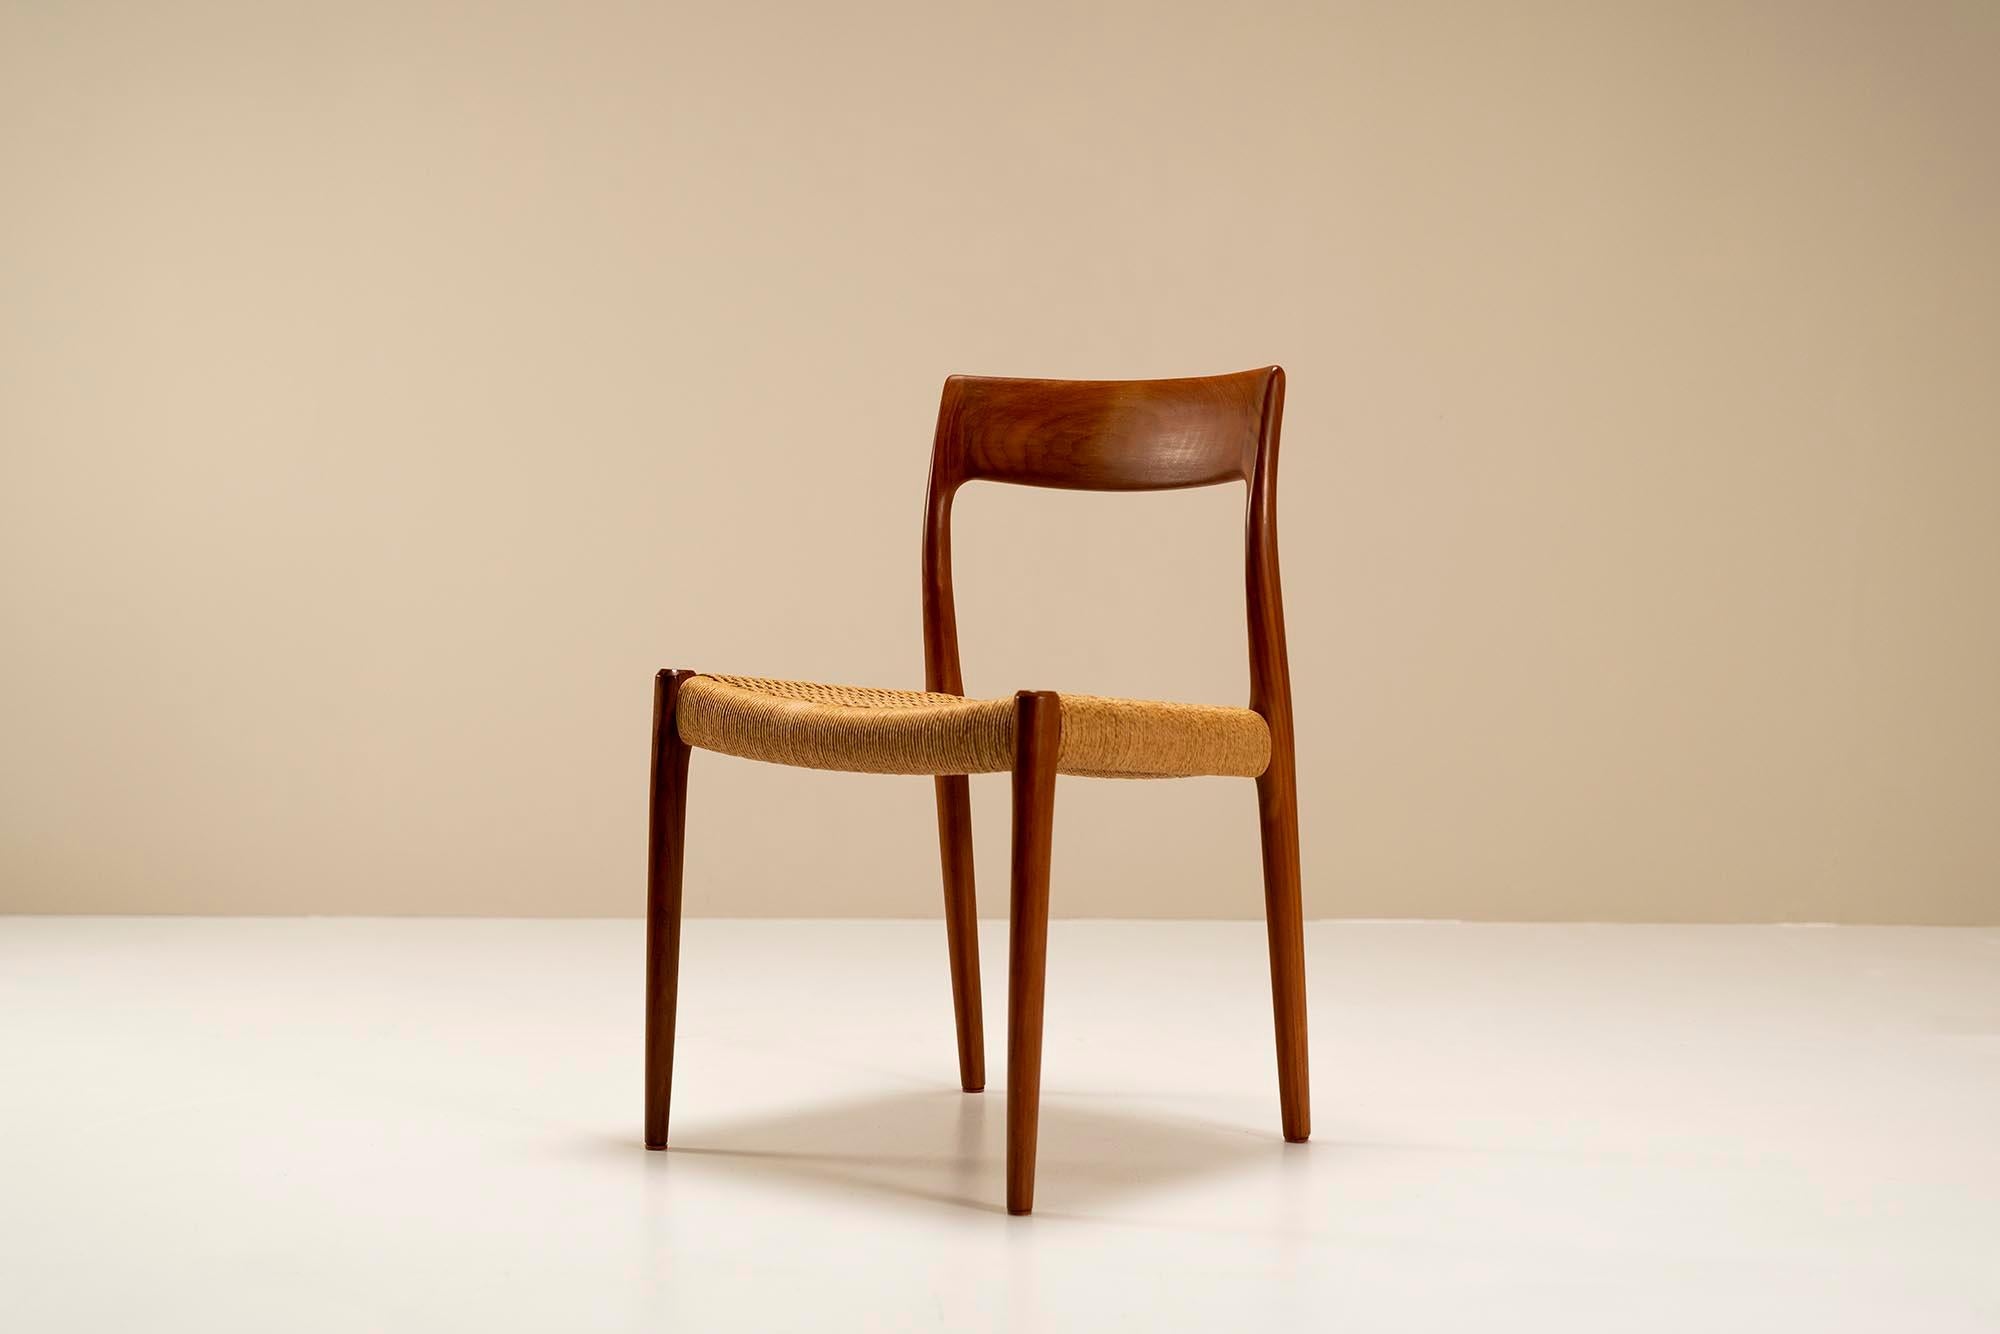 Set of Six 'Model 77' Dining Chairs in Teak by Niels Otto Møller, Denmark, 1950s For Sale 2